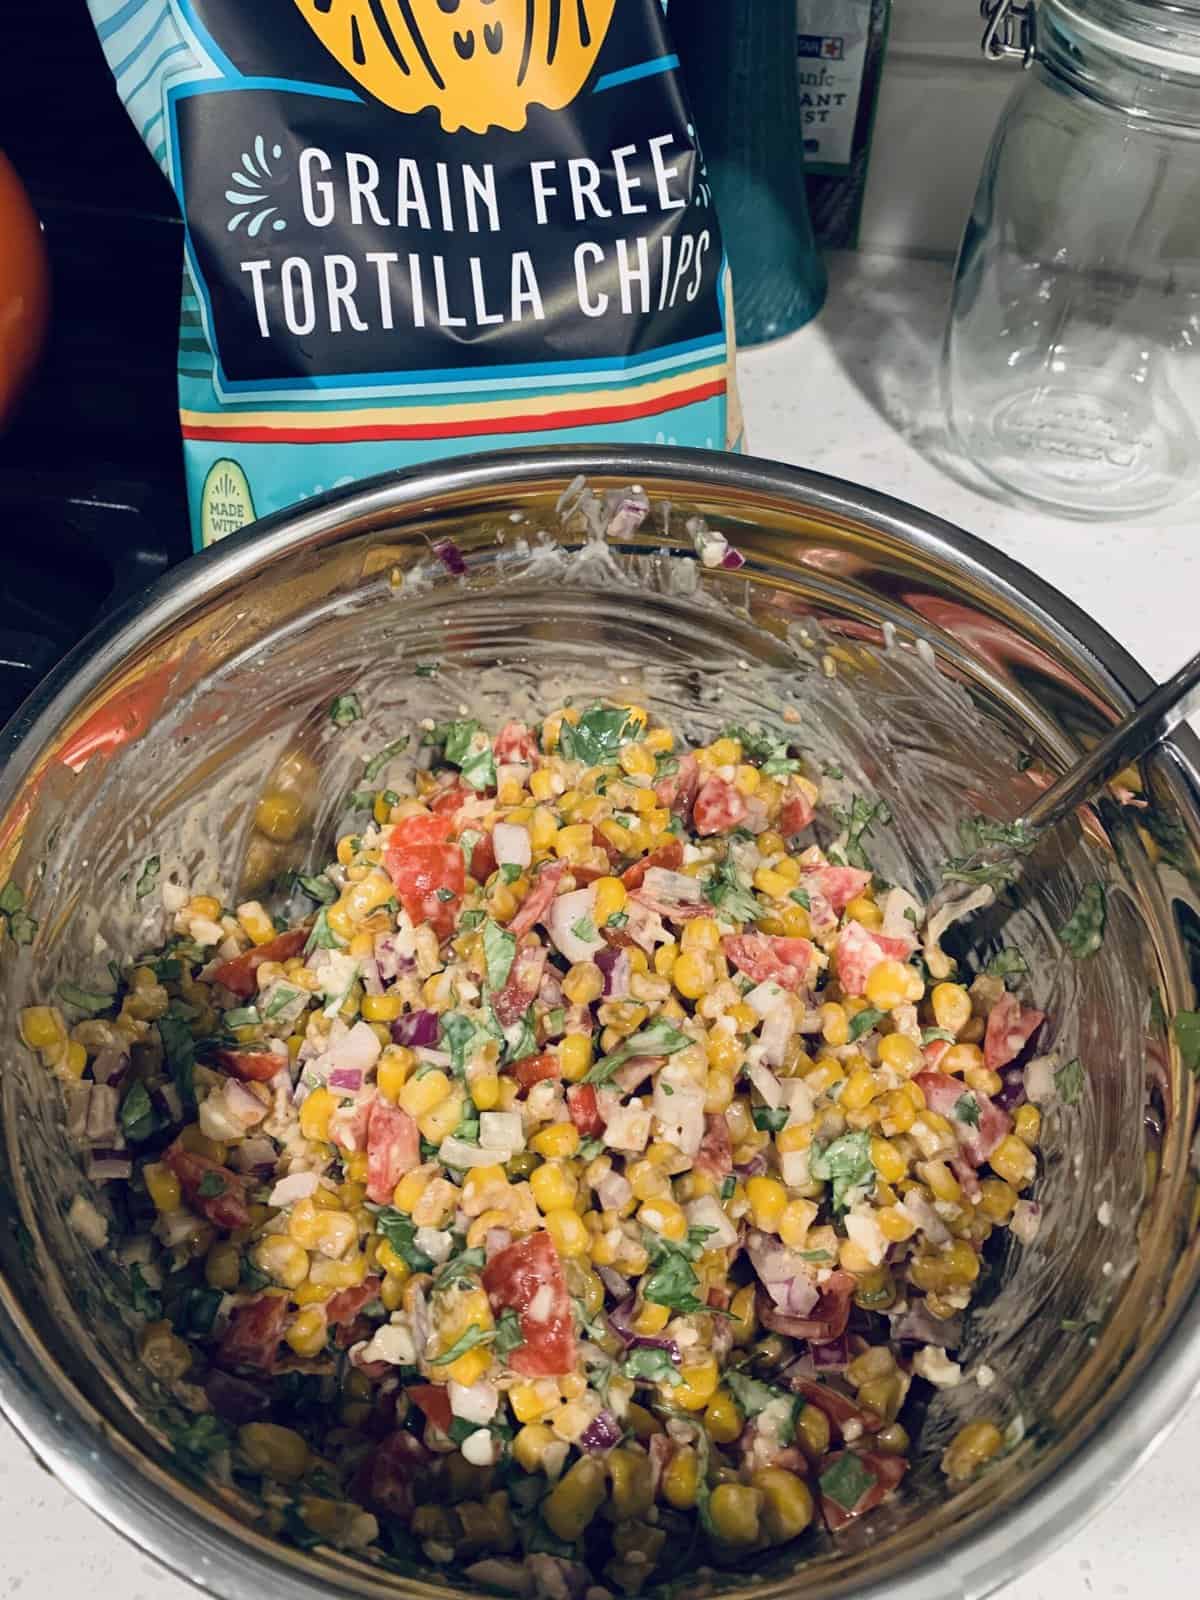 Grilled Mexican Street Corn (in 30 Minutes!) - Fit Foodie Finds